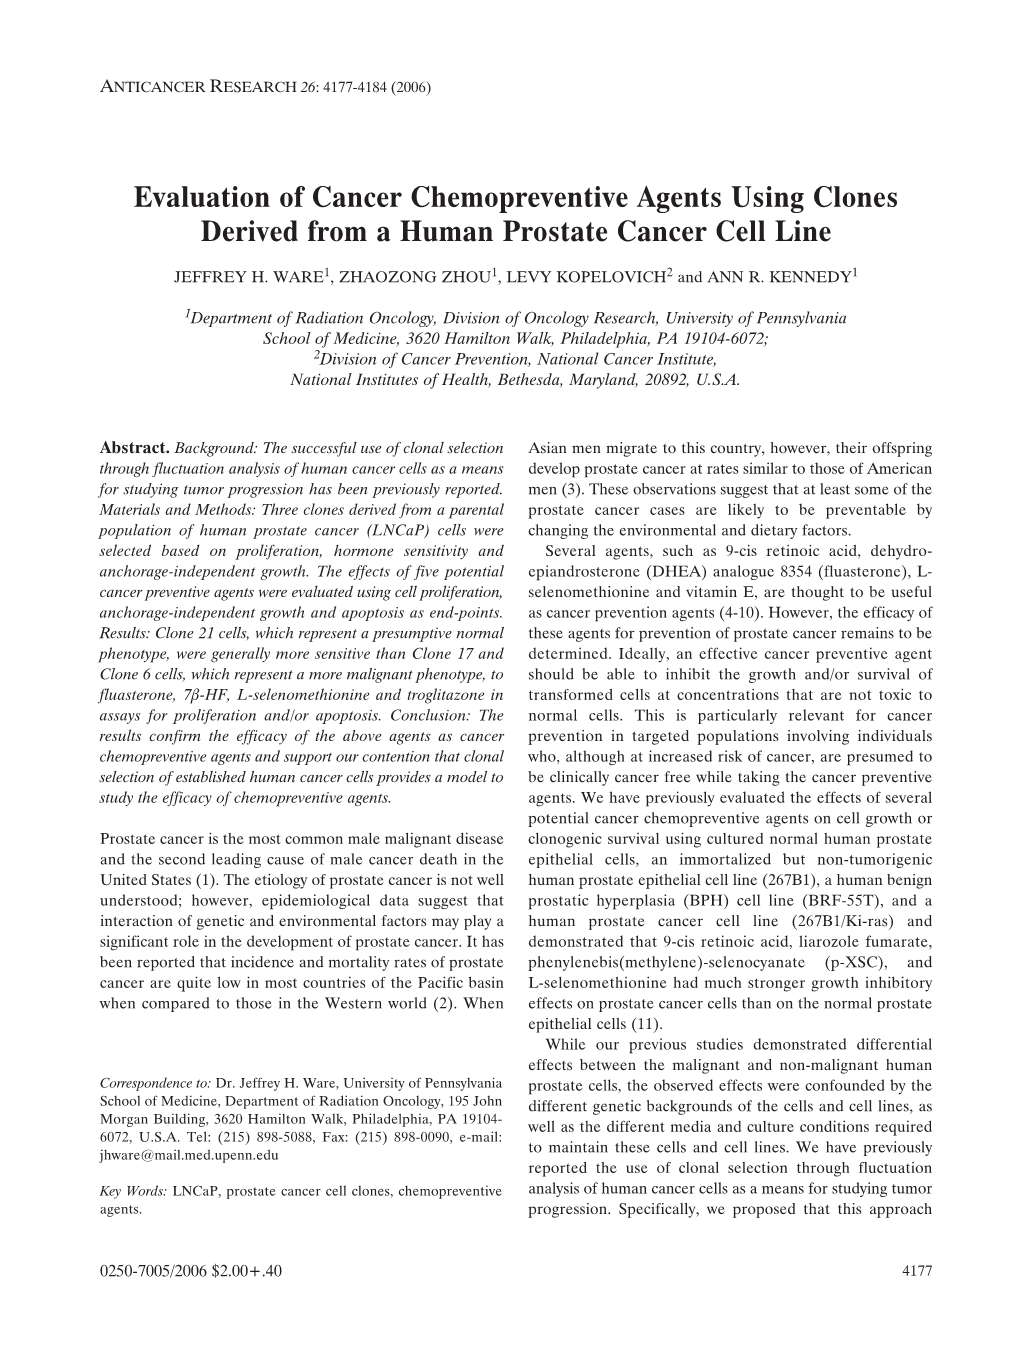 Evaluation of Cancer Chemopreventive Agents Using Clones Derived from a Human Prostate Cancer Cell Line